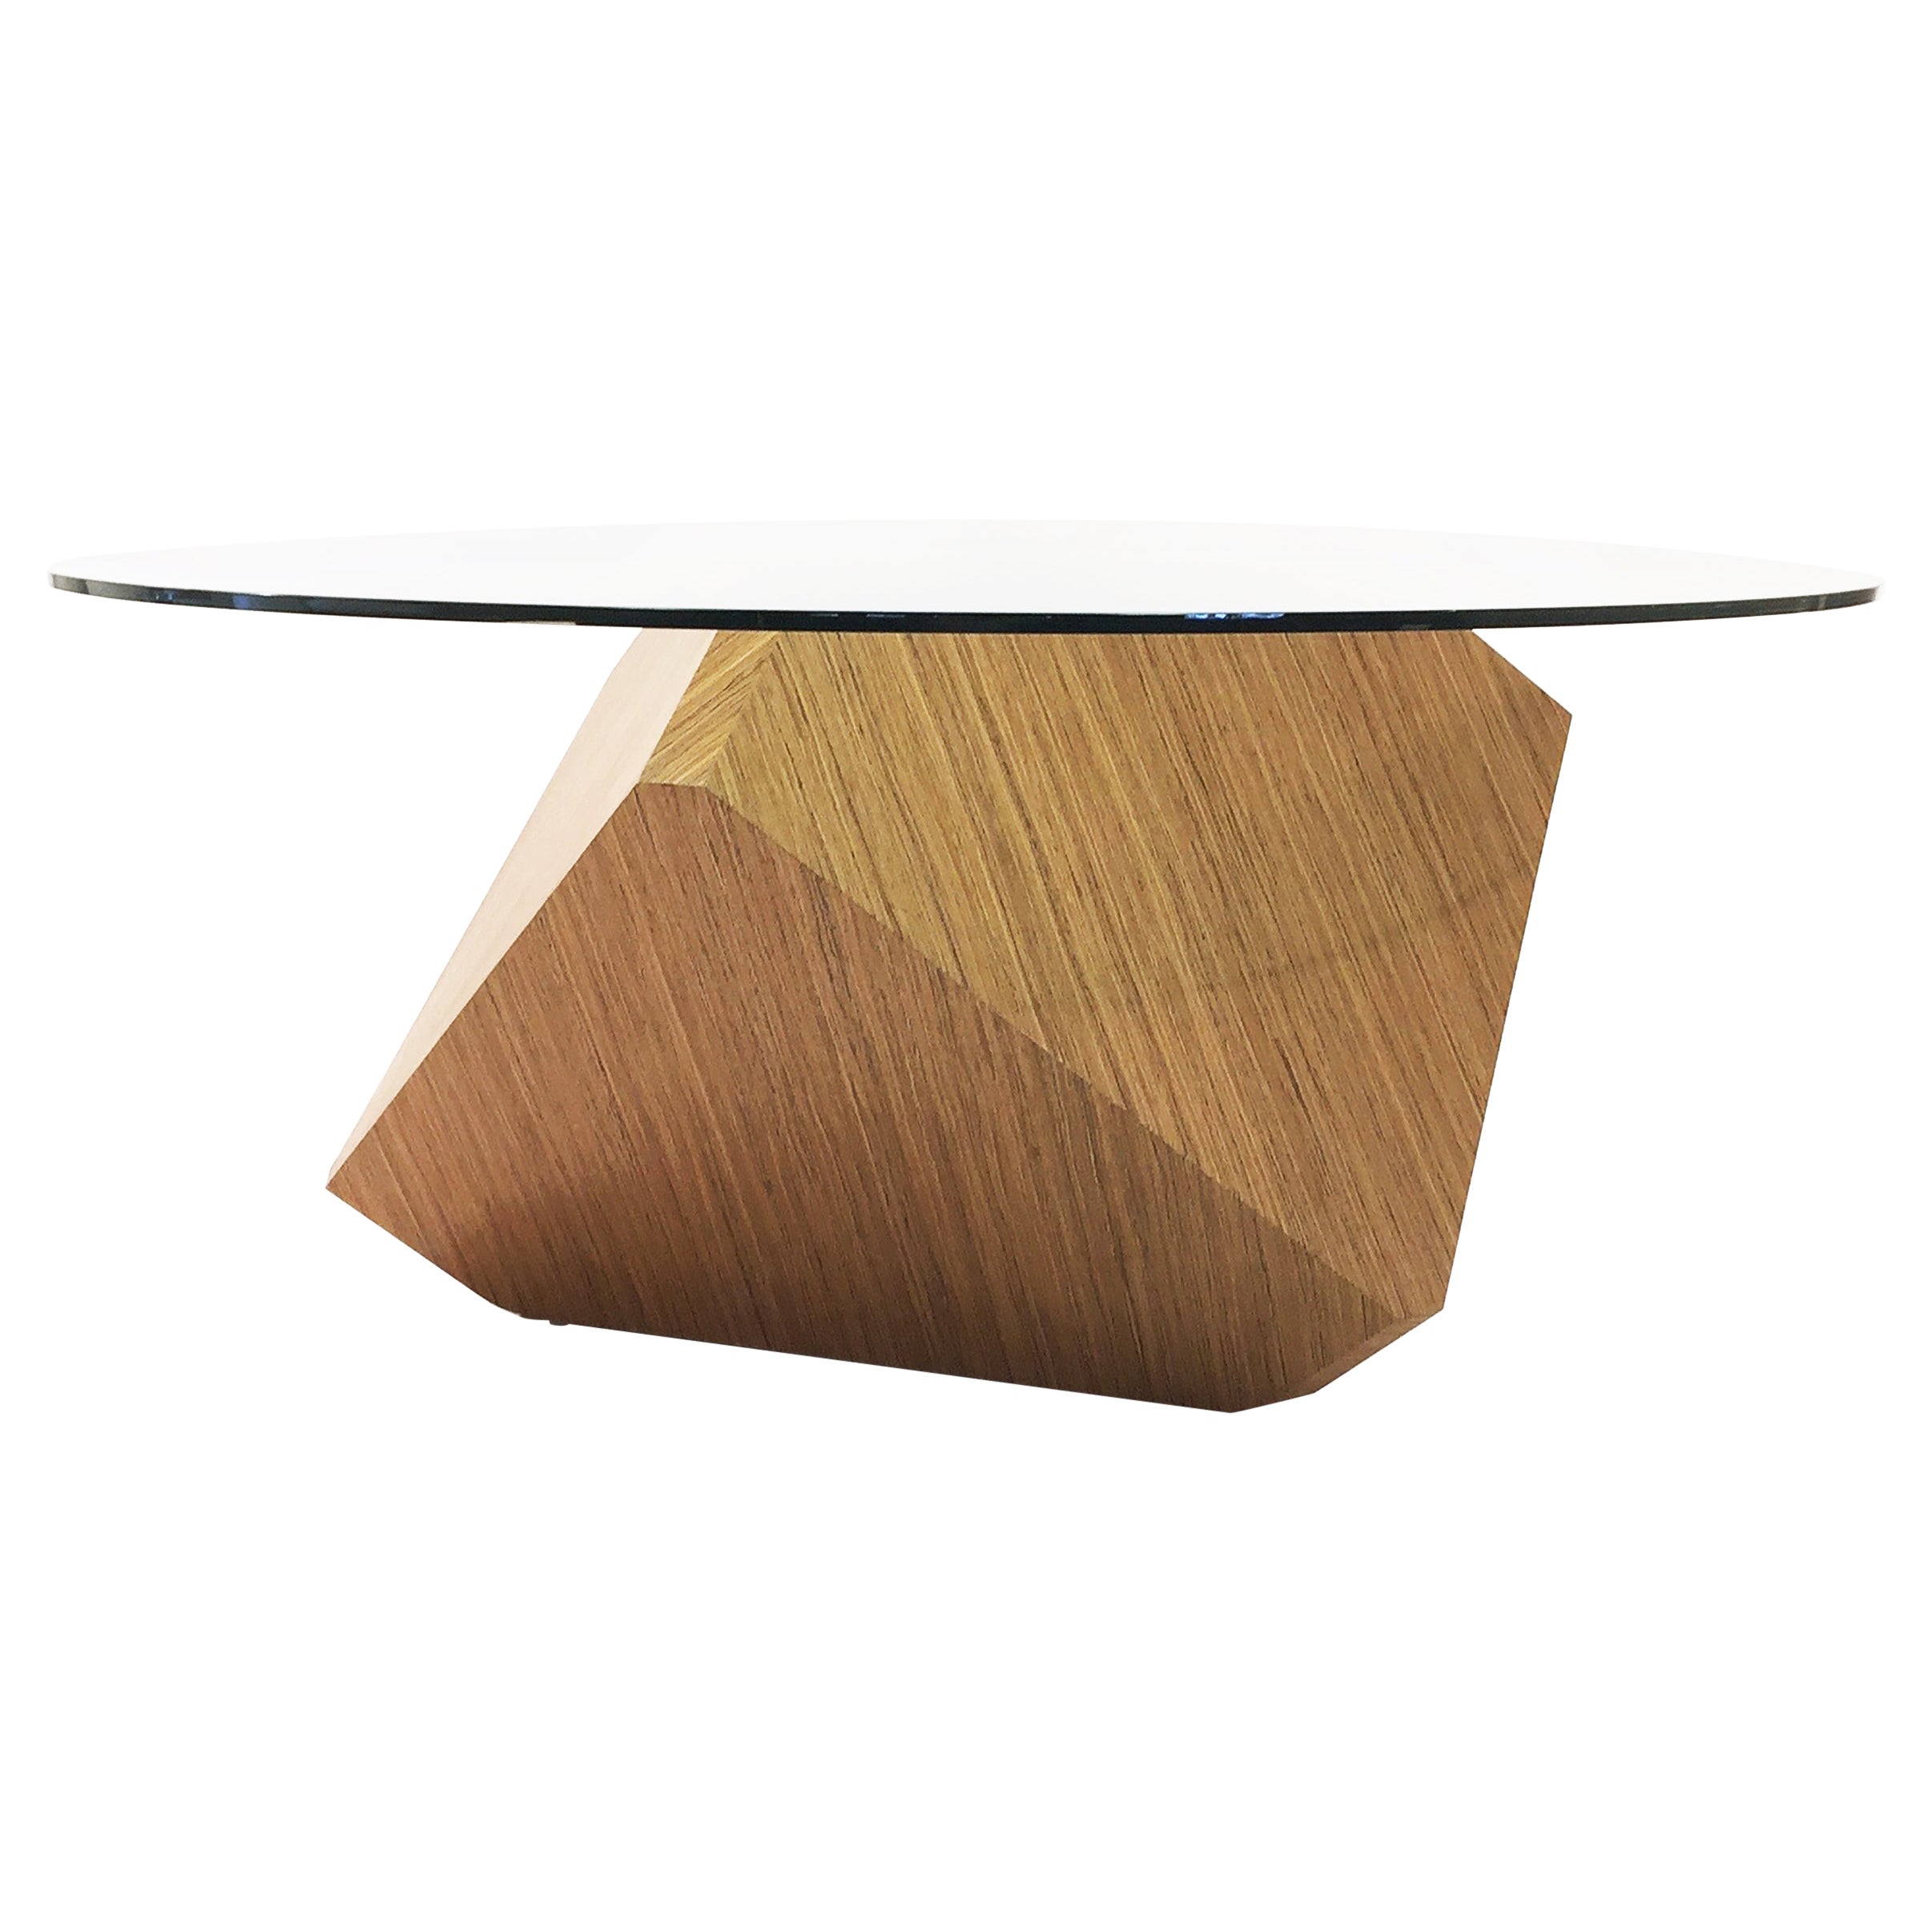 I - con - ic ; timeless, worthy of veneration ; see 'hal', modern pedestal table For Sale